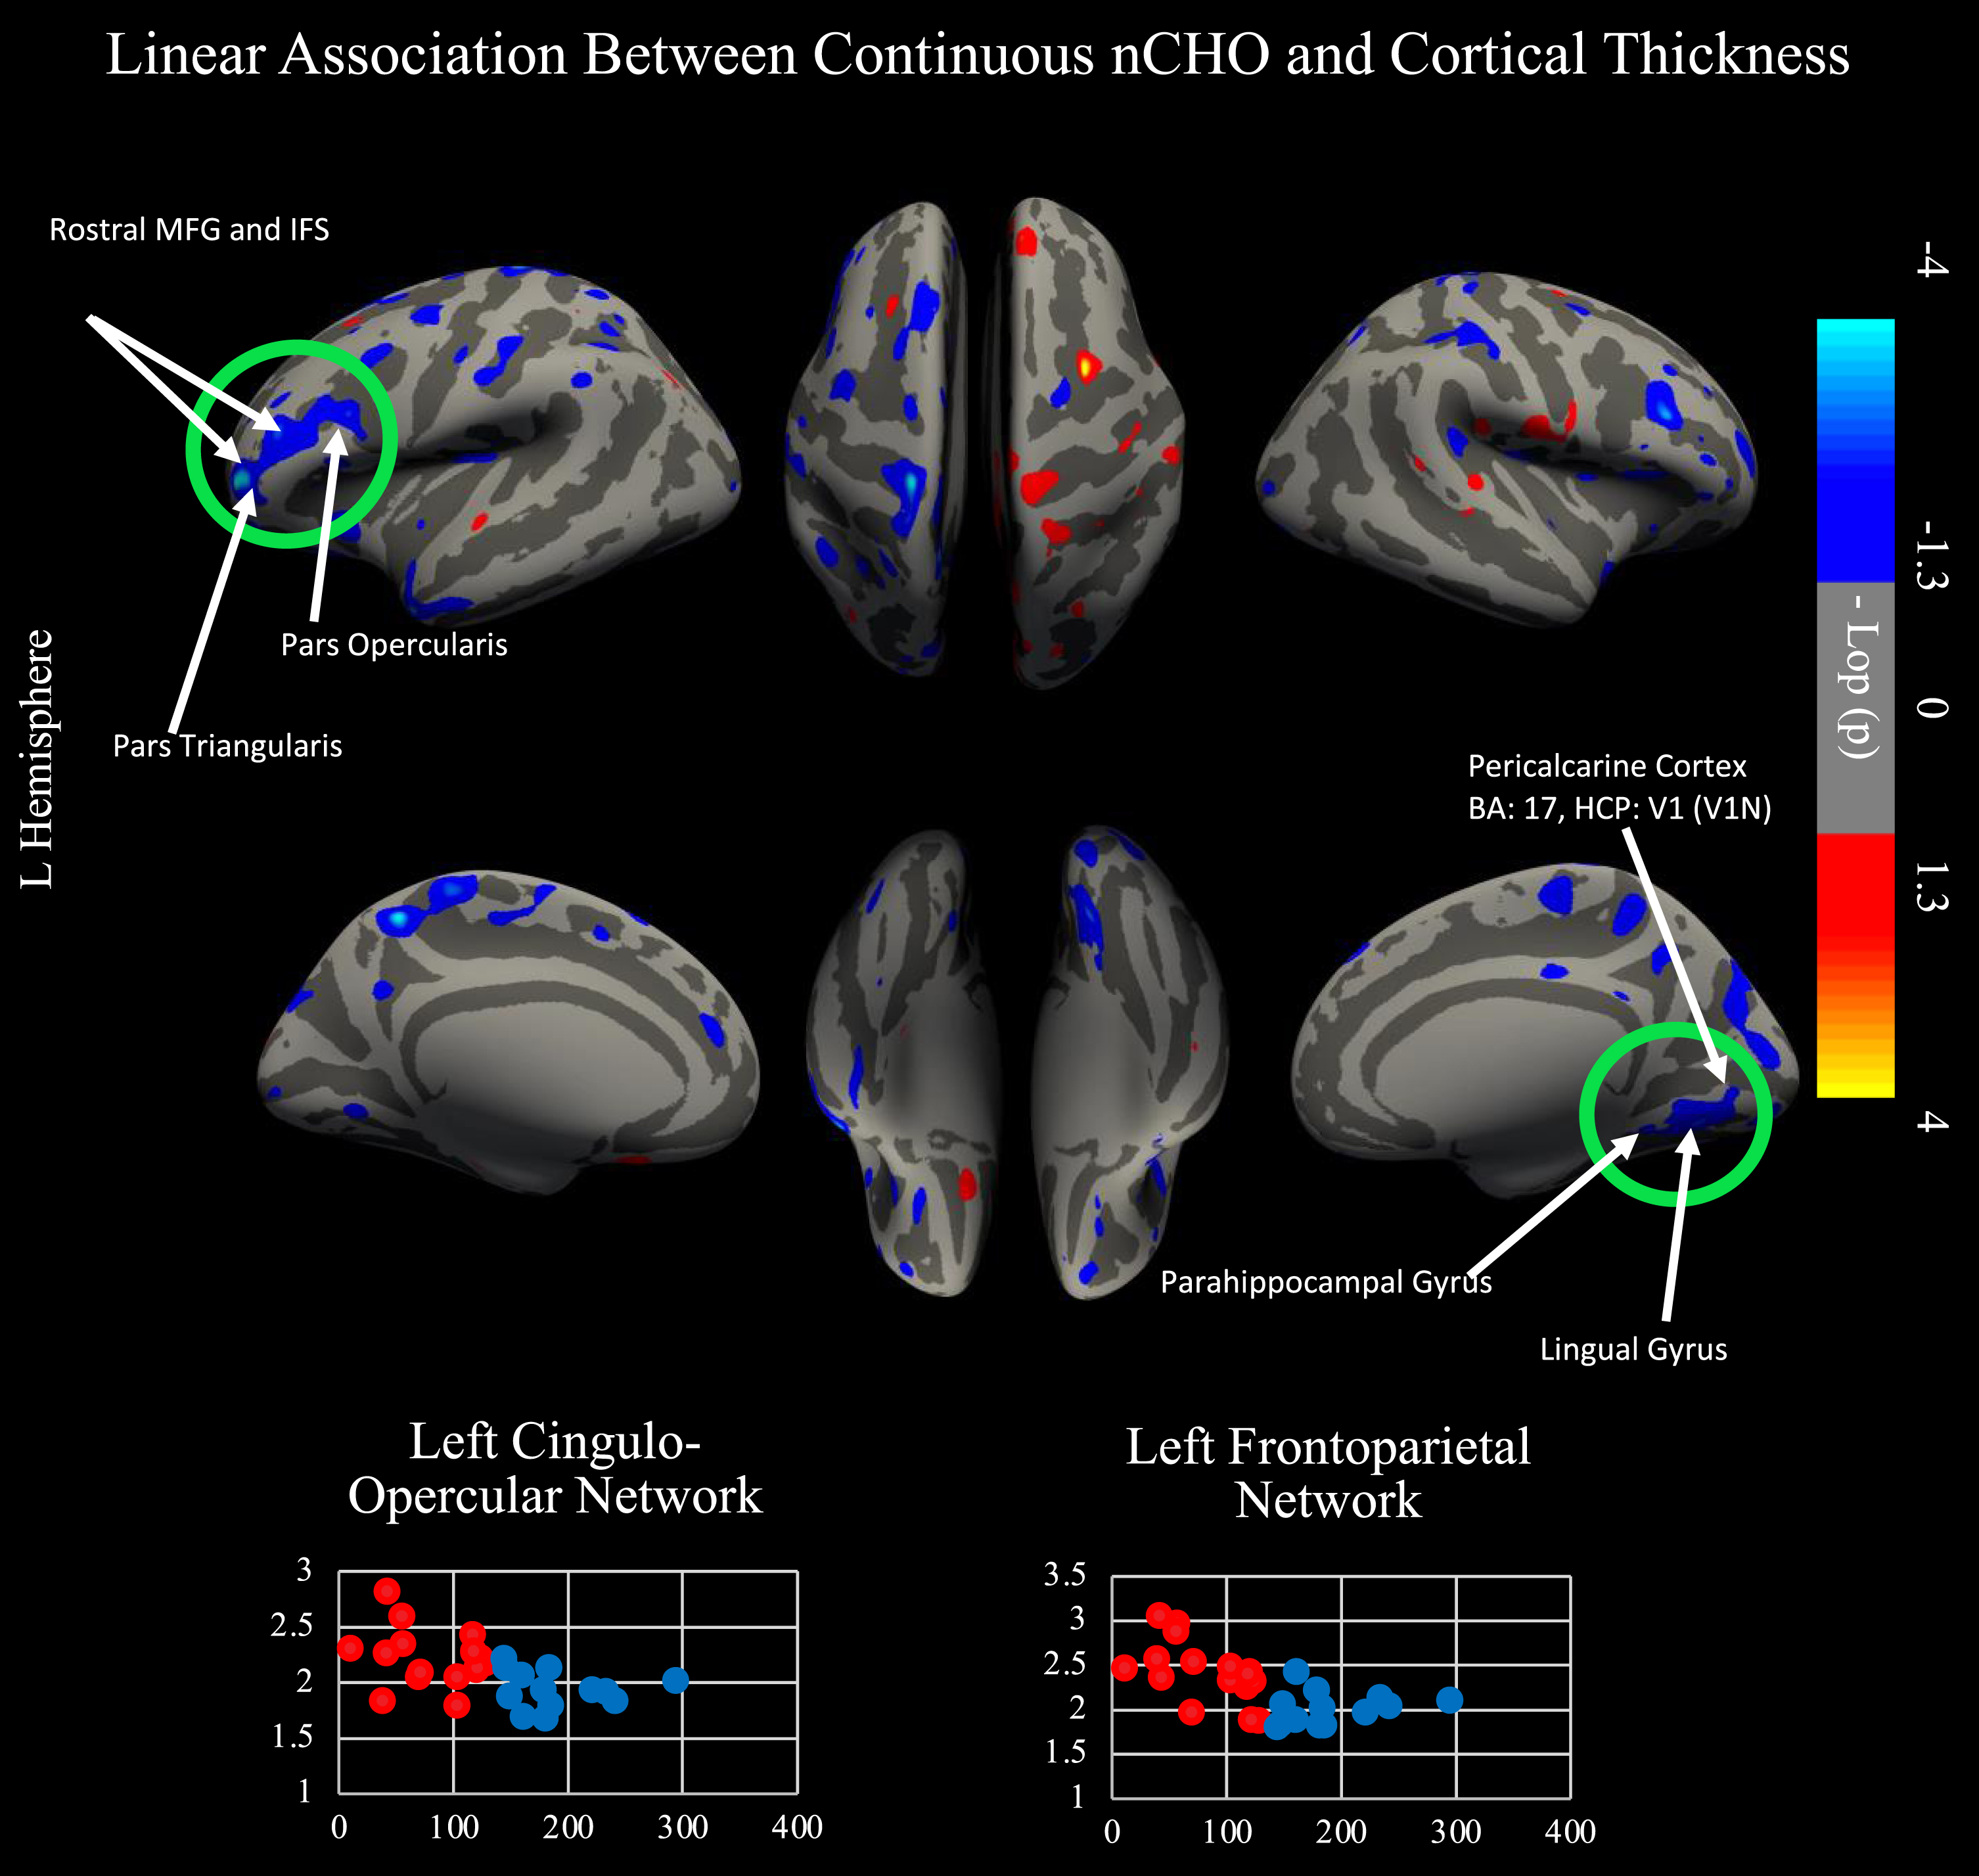 Linear relationship between nCHO and cortical thickness. Top of figure shows results from cortical surface analysis. Linear model includes age as a covariate. Green circles indicate regions that survived correction for multiple comparisons using CWP. White arrows point to highlighted anatomical regions. Cooler colors represent voxels with significantly thinner cortex in individuals eating a higher nCHO diet. Regions significant after CWP correction include anterior and posterior 9-46v (a9-46v and p9-46v), anterior 47r (a47r), posterior 47r (p47r), IFSa, IFSp, IFJa, 46, and rostral area 6 (6r) in the left hemisphere and the second (V2) and third visual areas (V3), ventromedial visual area 1 (VMV1) and 2 (VMV2), primary visual cortex (V1), and the parahippocampal gyrus (PHA1) in the right hemisphere. Bottom of figure displays voxels significant in our primary and secondary analyses: two-tailed t-test comparing lower –higher net carbohydrate (nCHO) diet groups (Fig. 1) and linear regression model of the association between nCHO and cortical thickness independent of age (top of figure).